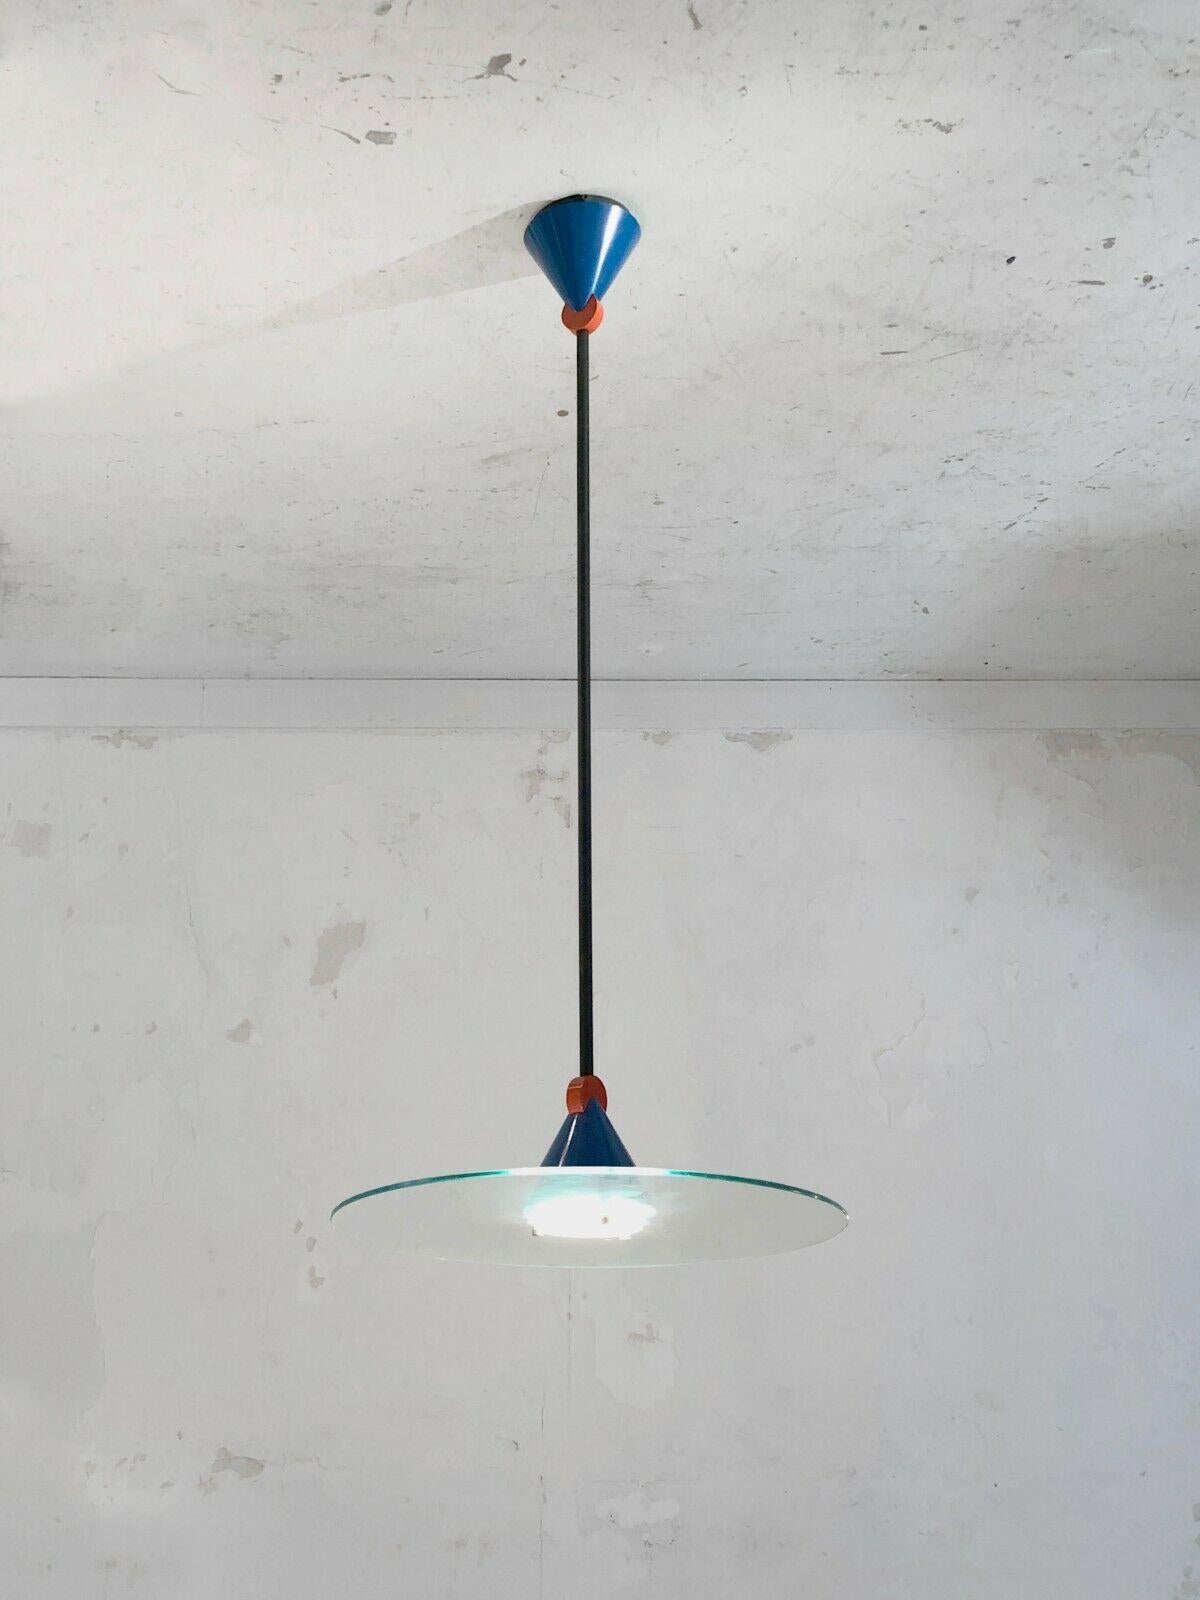 A very large, elegant and minimal suspension, chandelier, Post-Modernist, Bauhaus, Constructivist, Memphis, main axis in slightly granite matte black lacquered tubular metal, interlocking geometric structures in red and blue lacquered metal, halogen